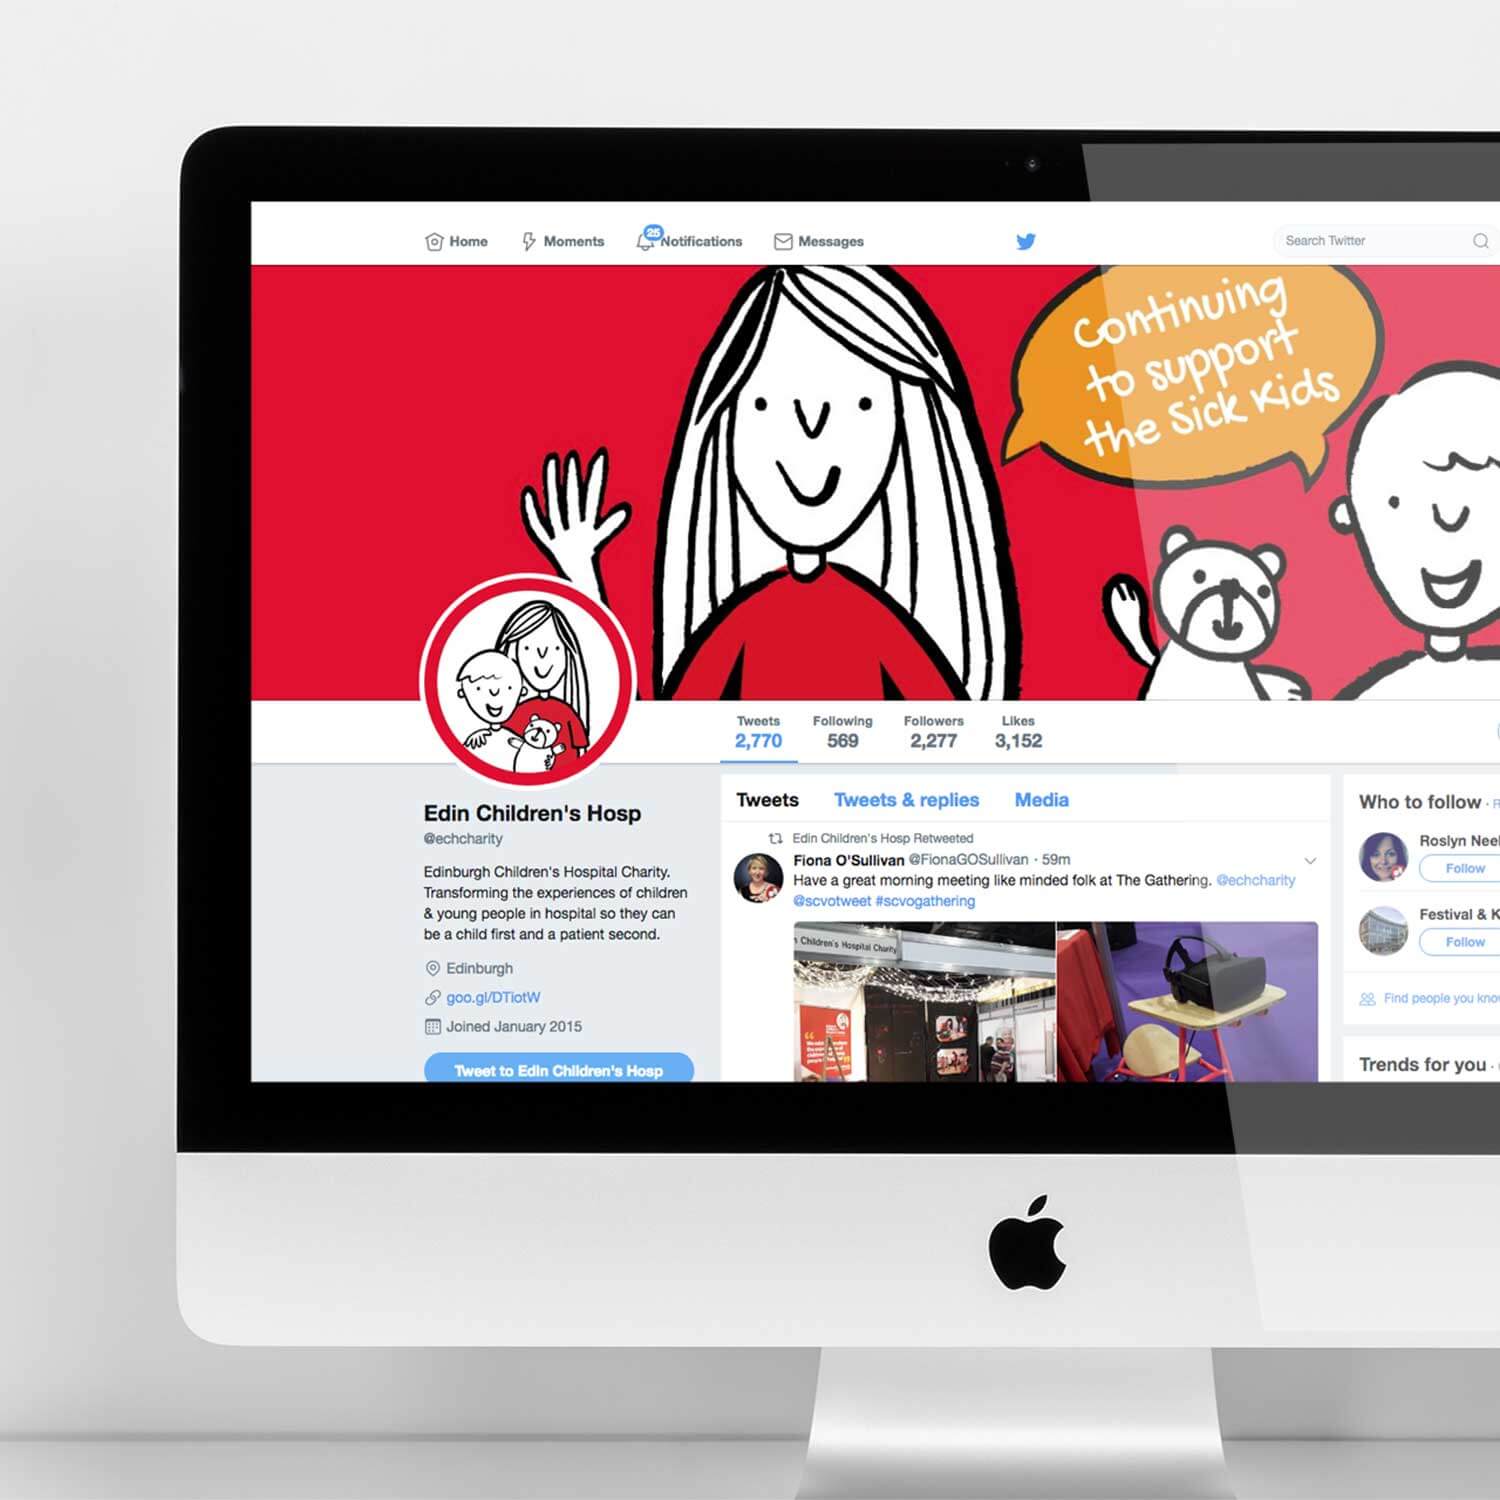 Branded social media visual for third sector marketing project